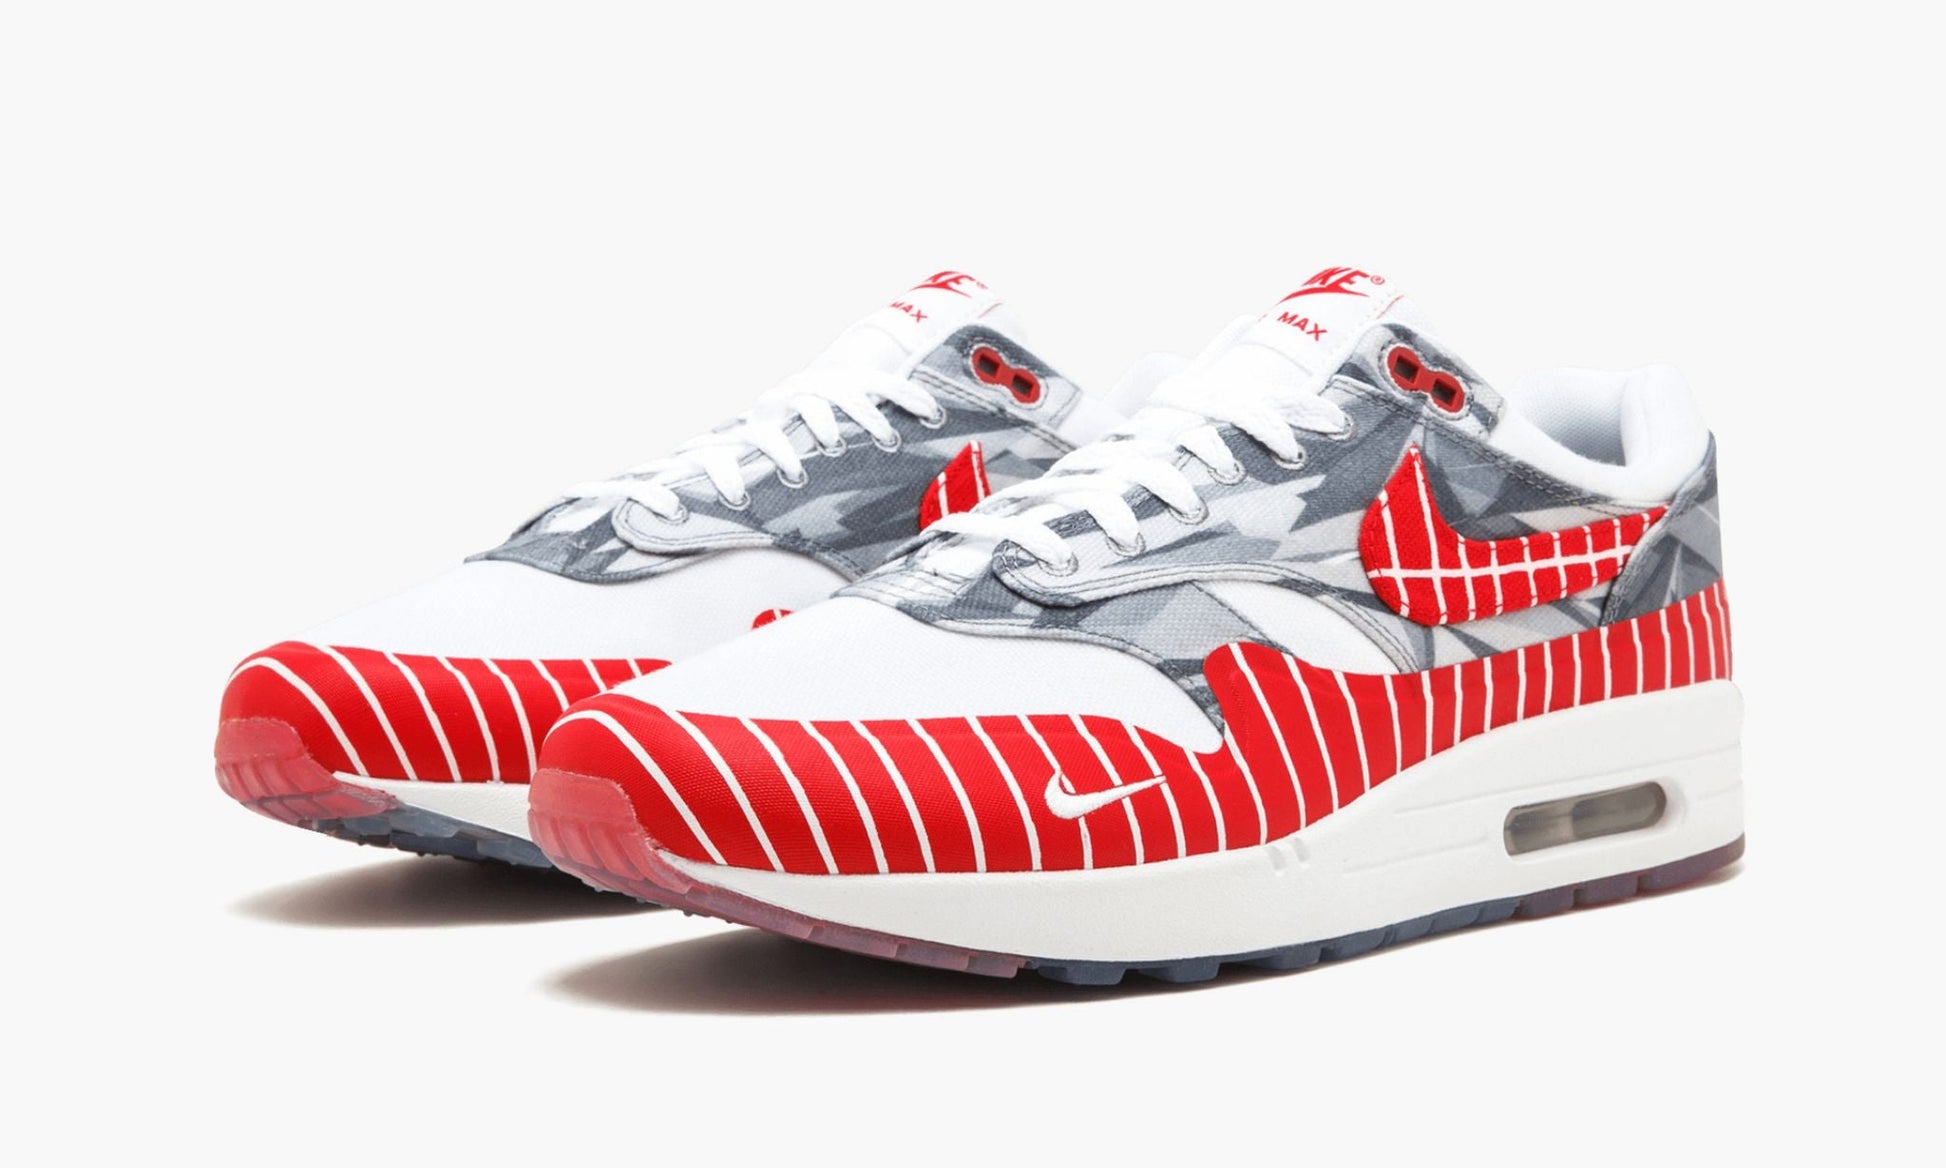 Air Max 1 LHM "Latin Heritage Month"